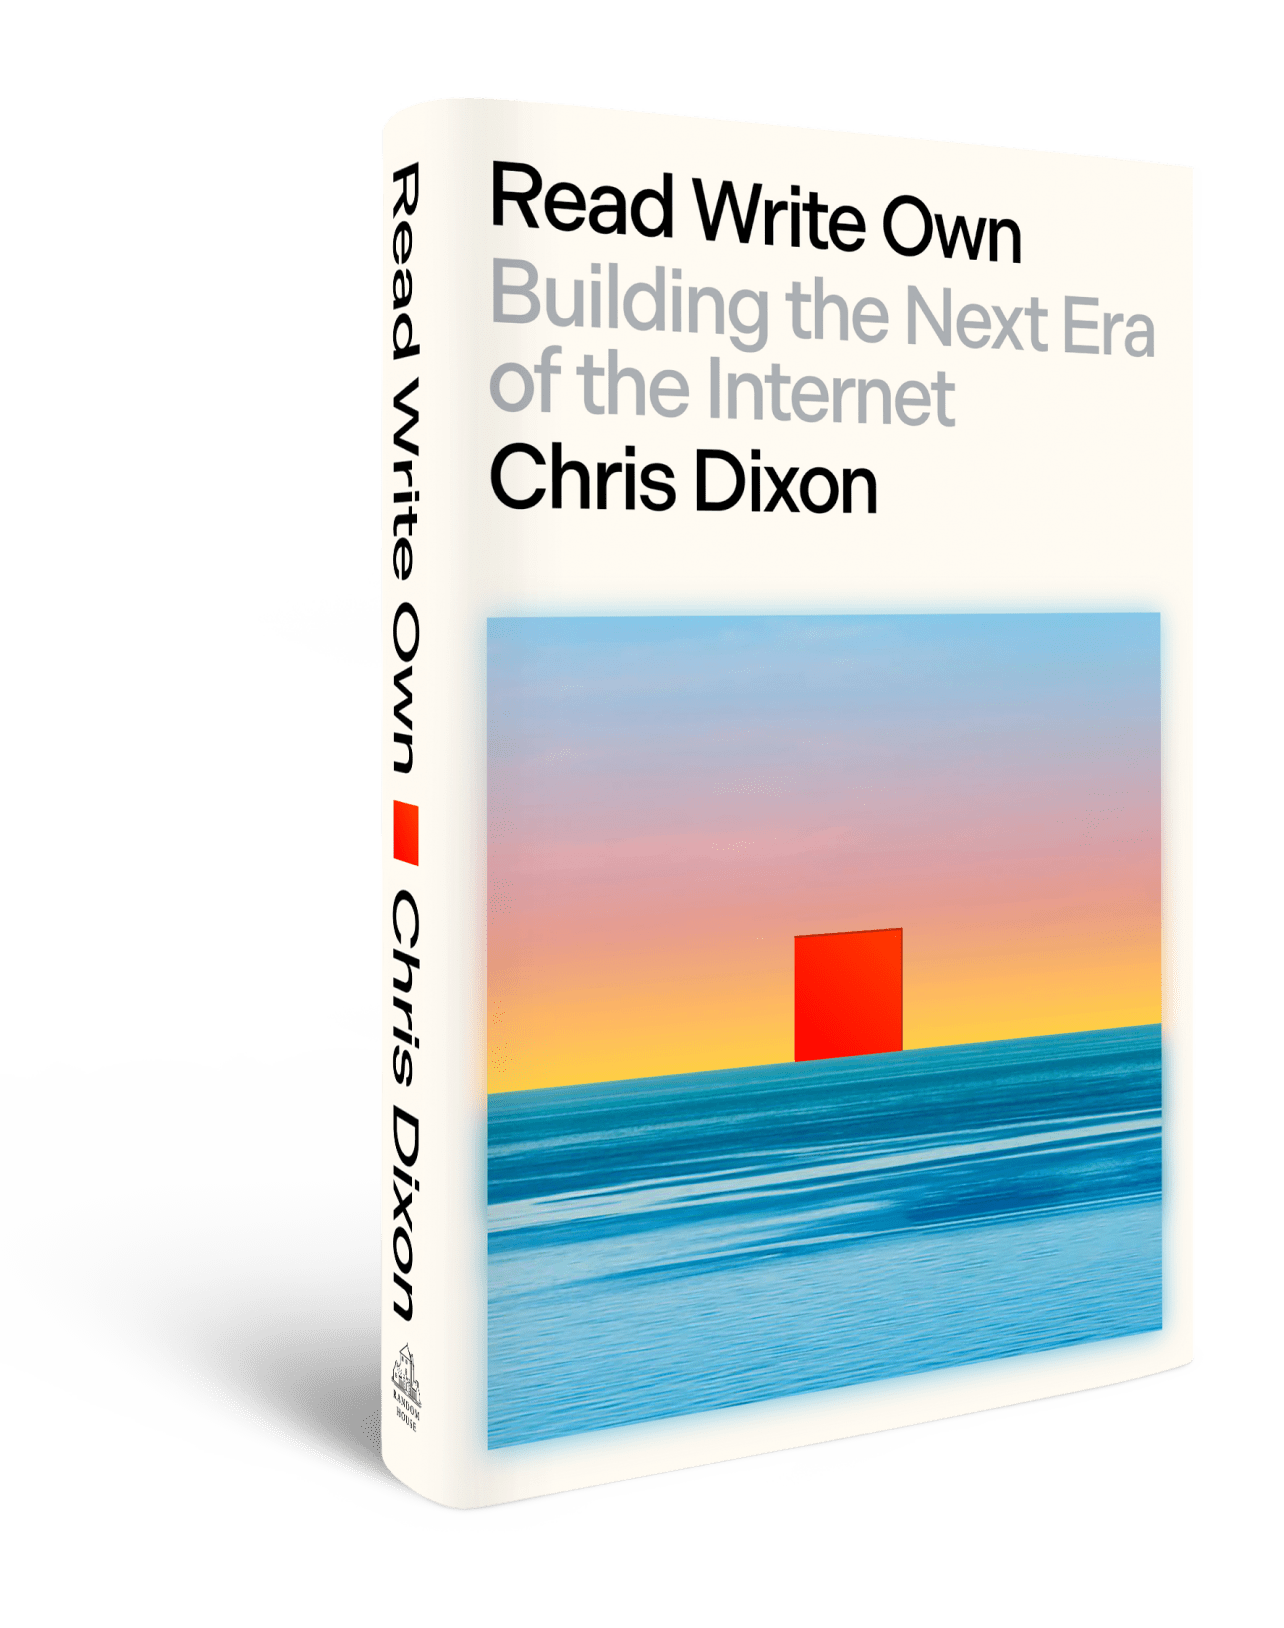 Hardcover book standing on end: Read Write Own by Chris Dixon